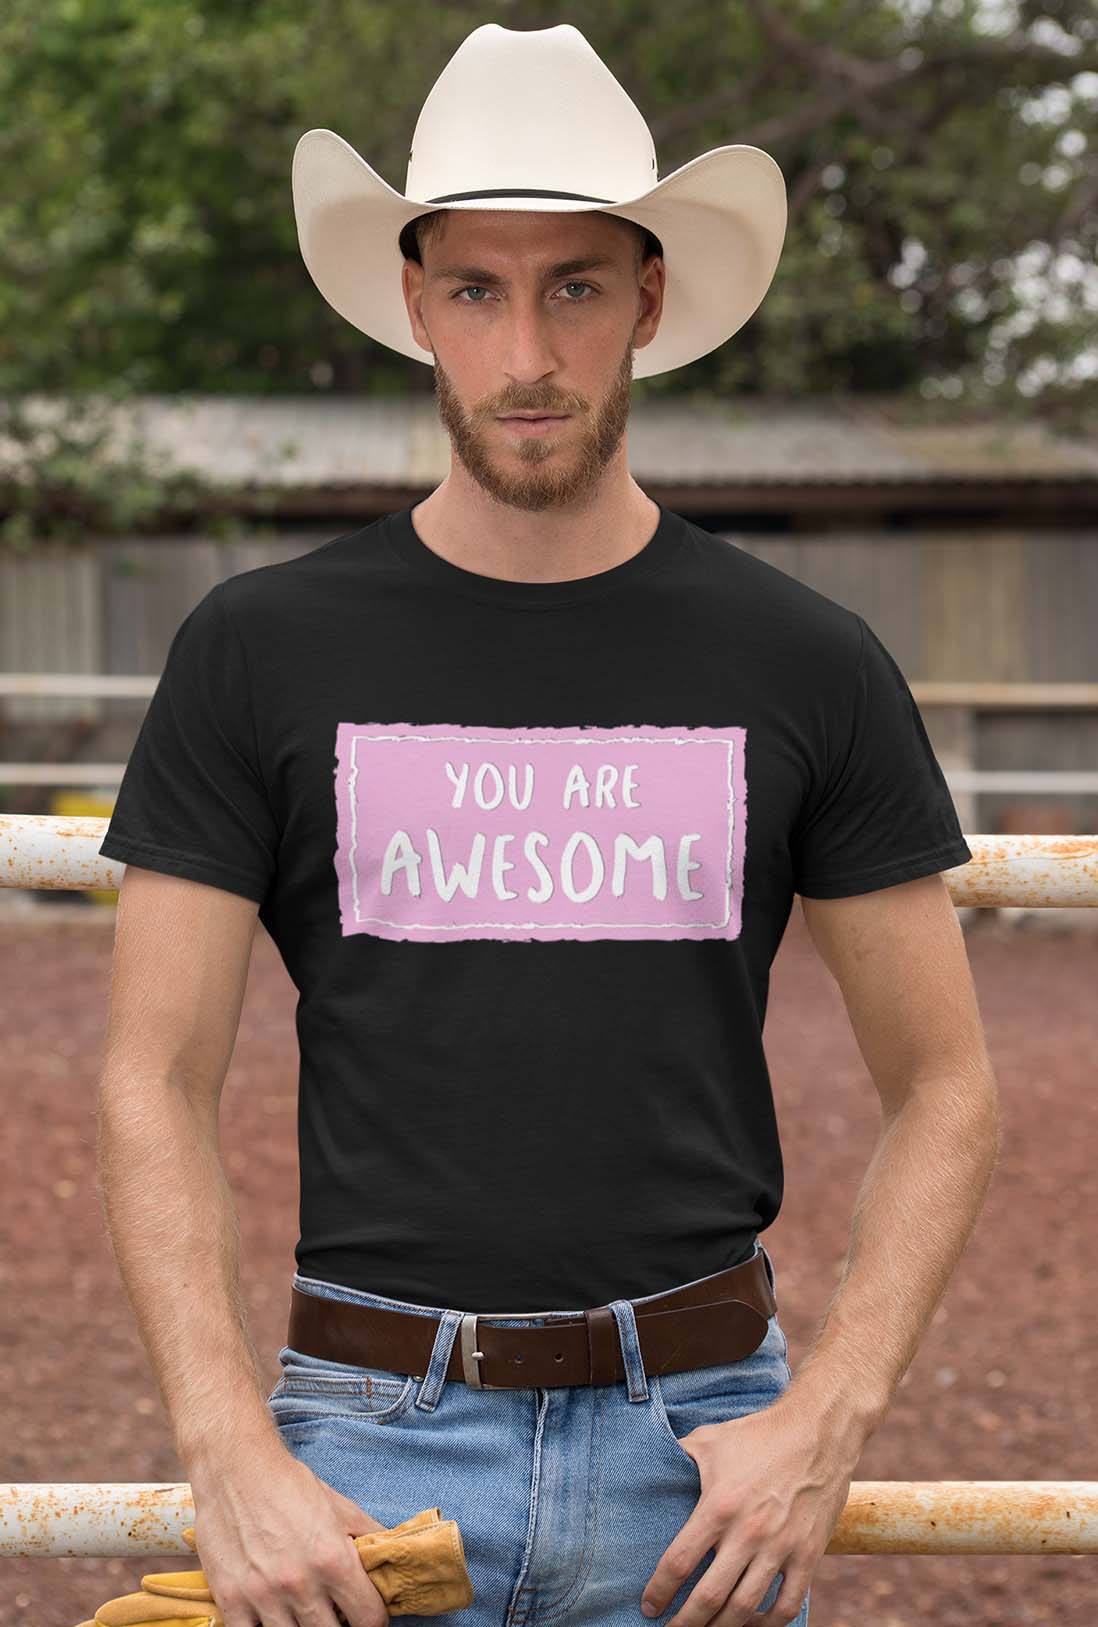 You Are Awesome Men's Cotton T-Shirt